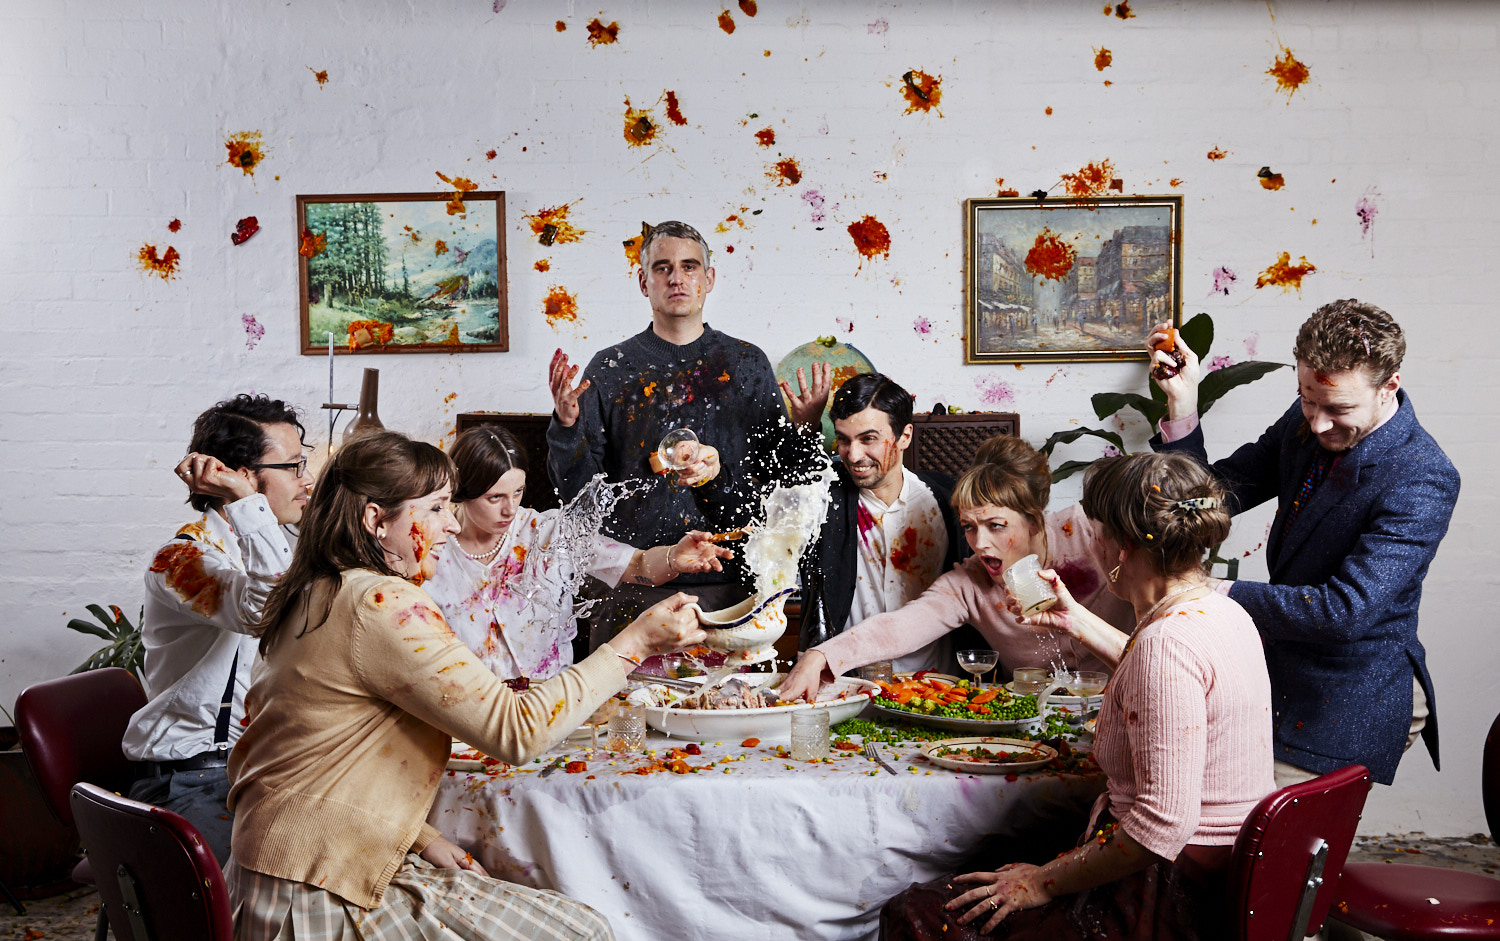 A scene depicting Markj standing behind a dinning table with his guests having a food fight.